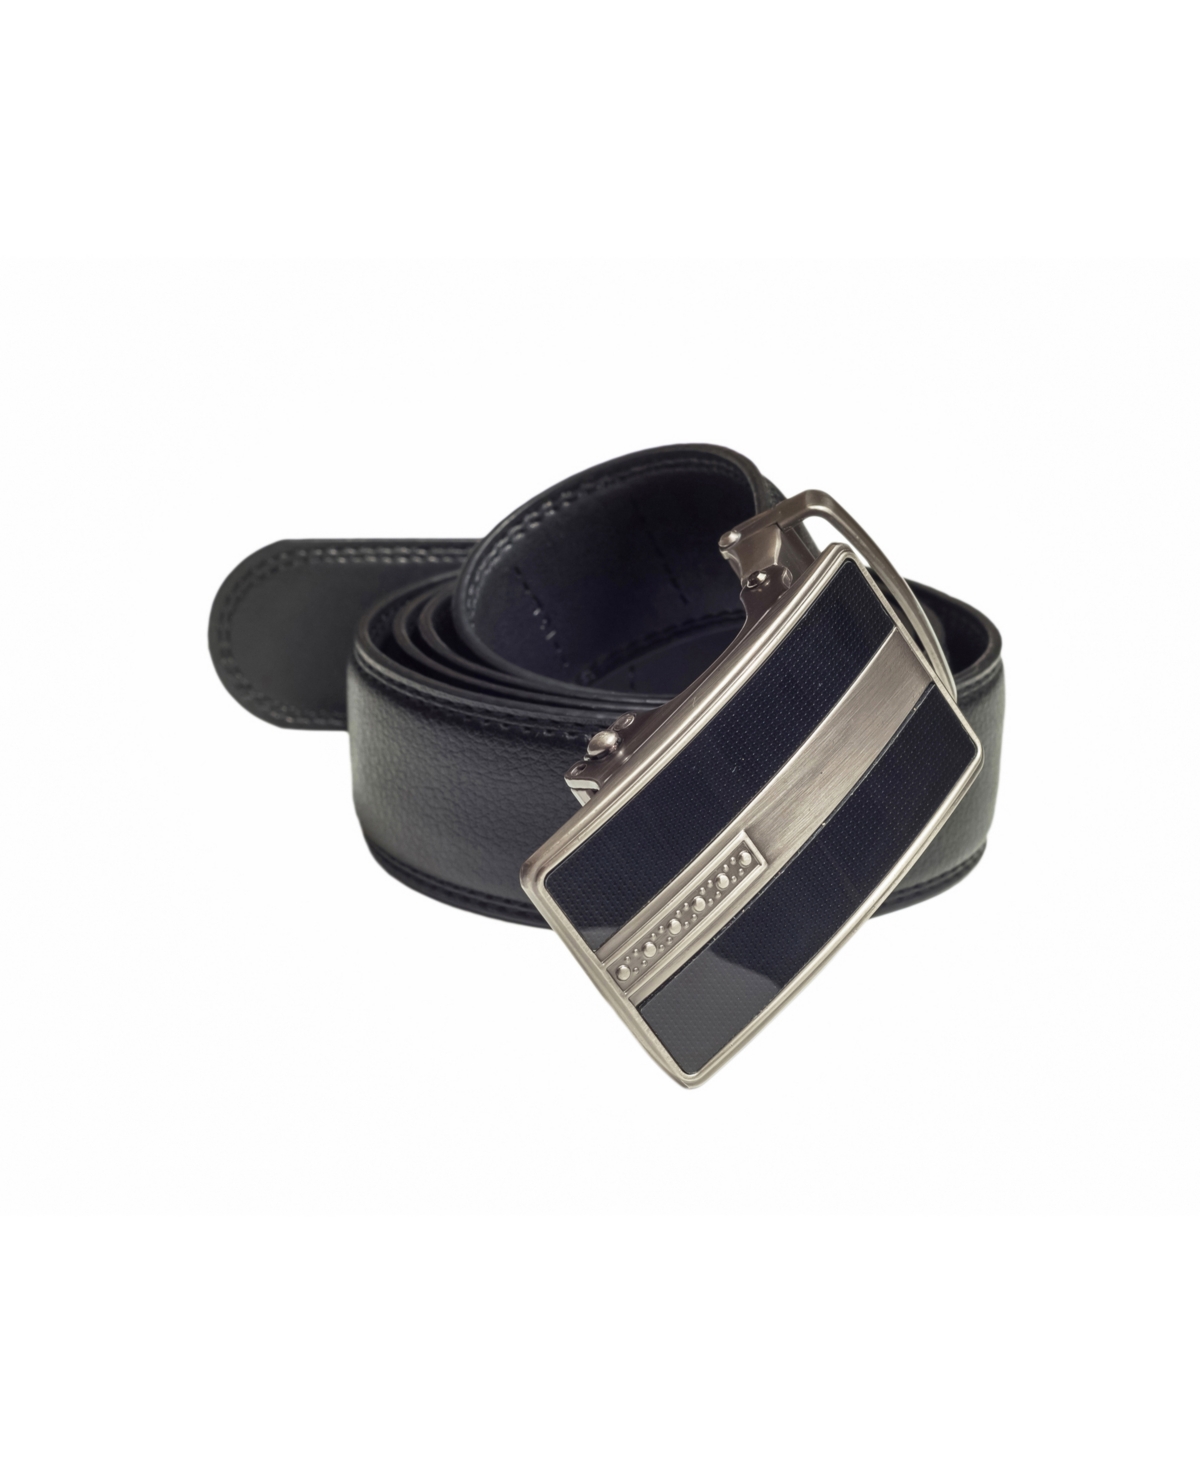 Champs Automatic and Adjustable Belt